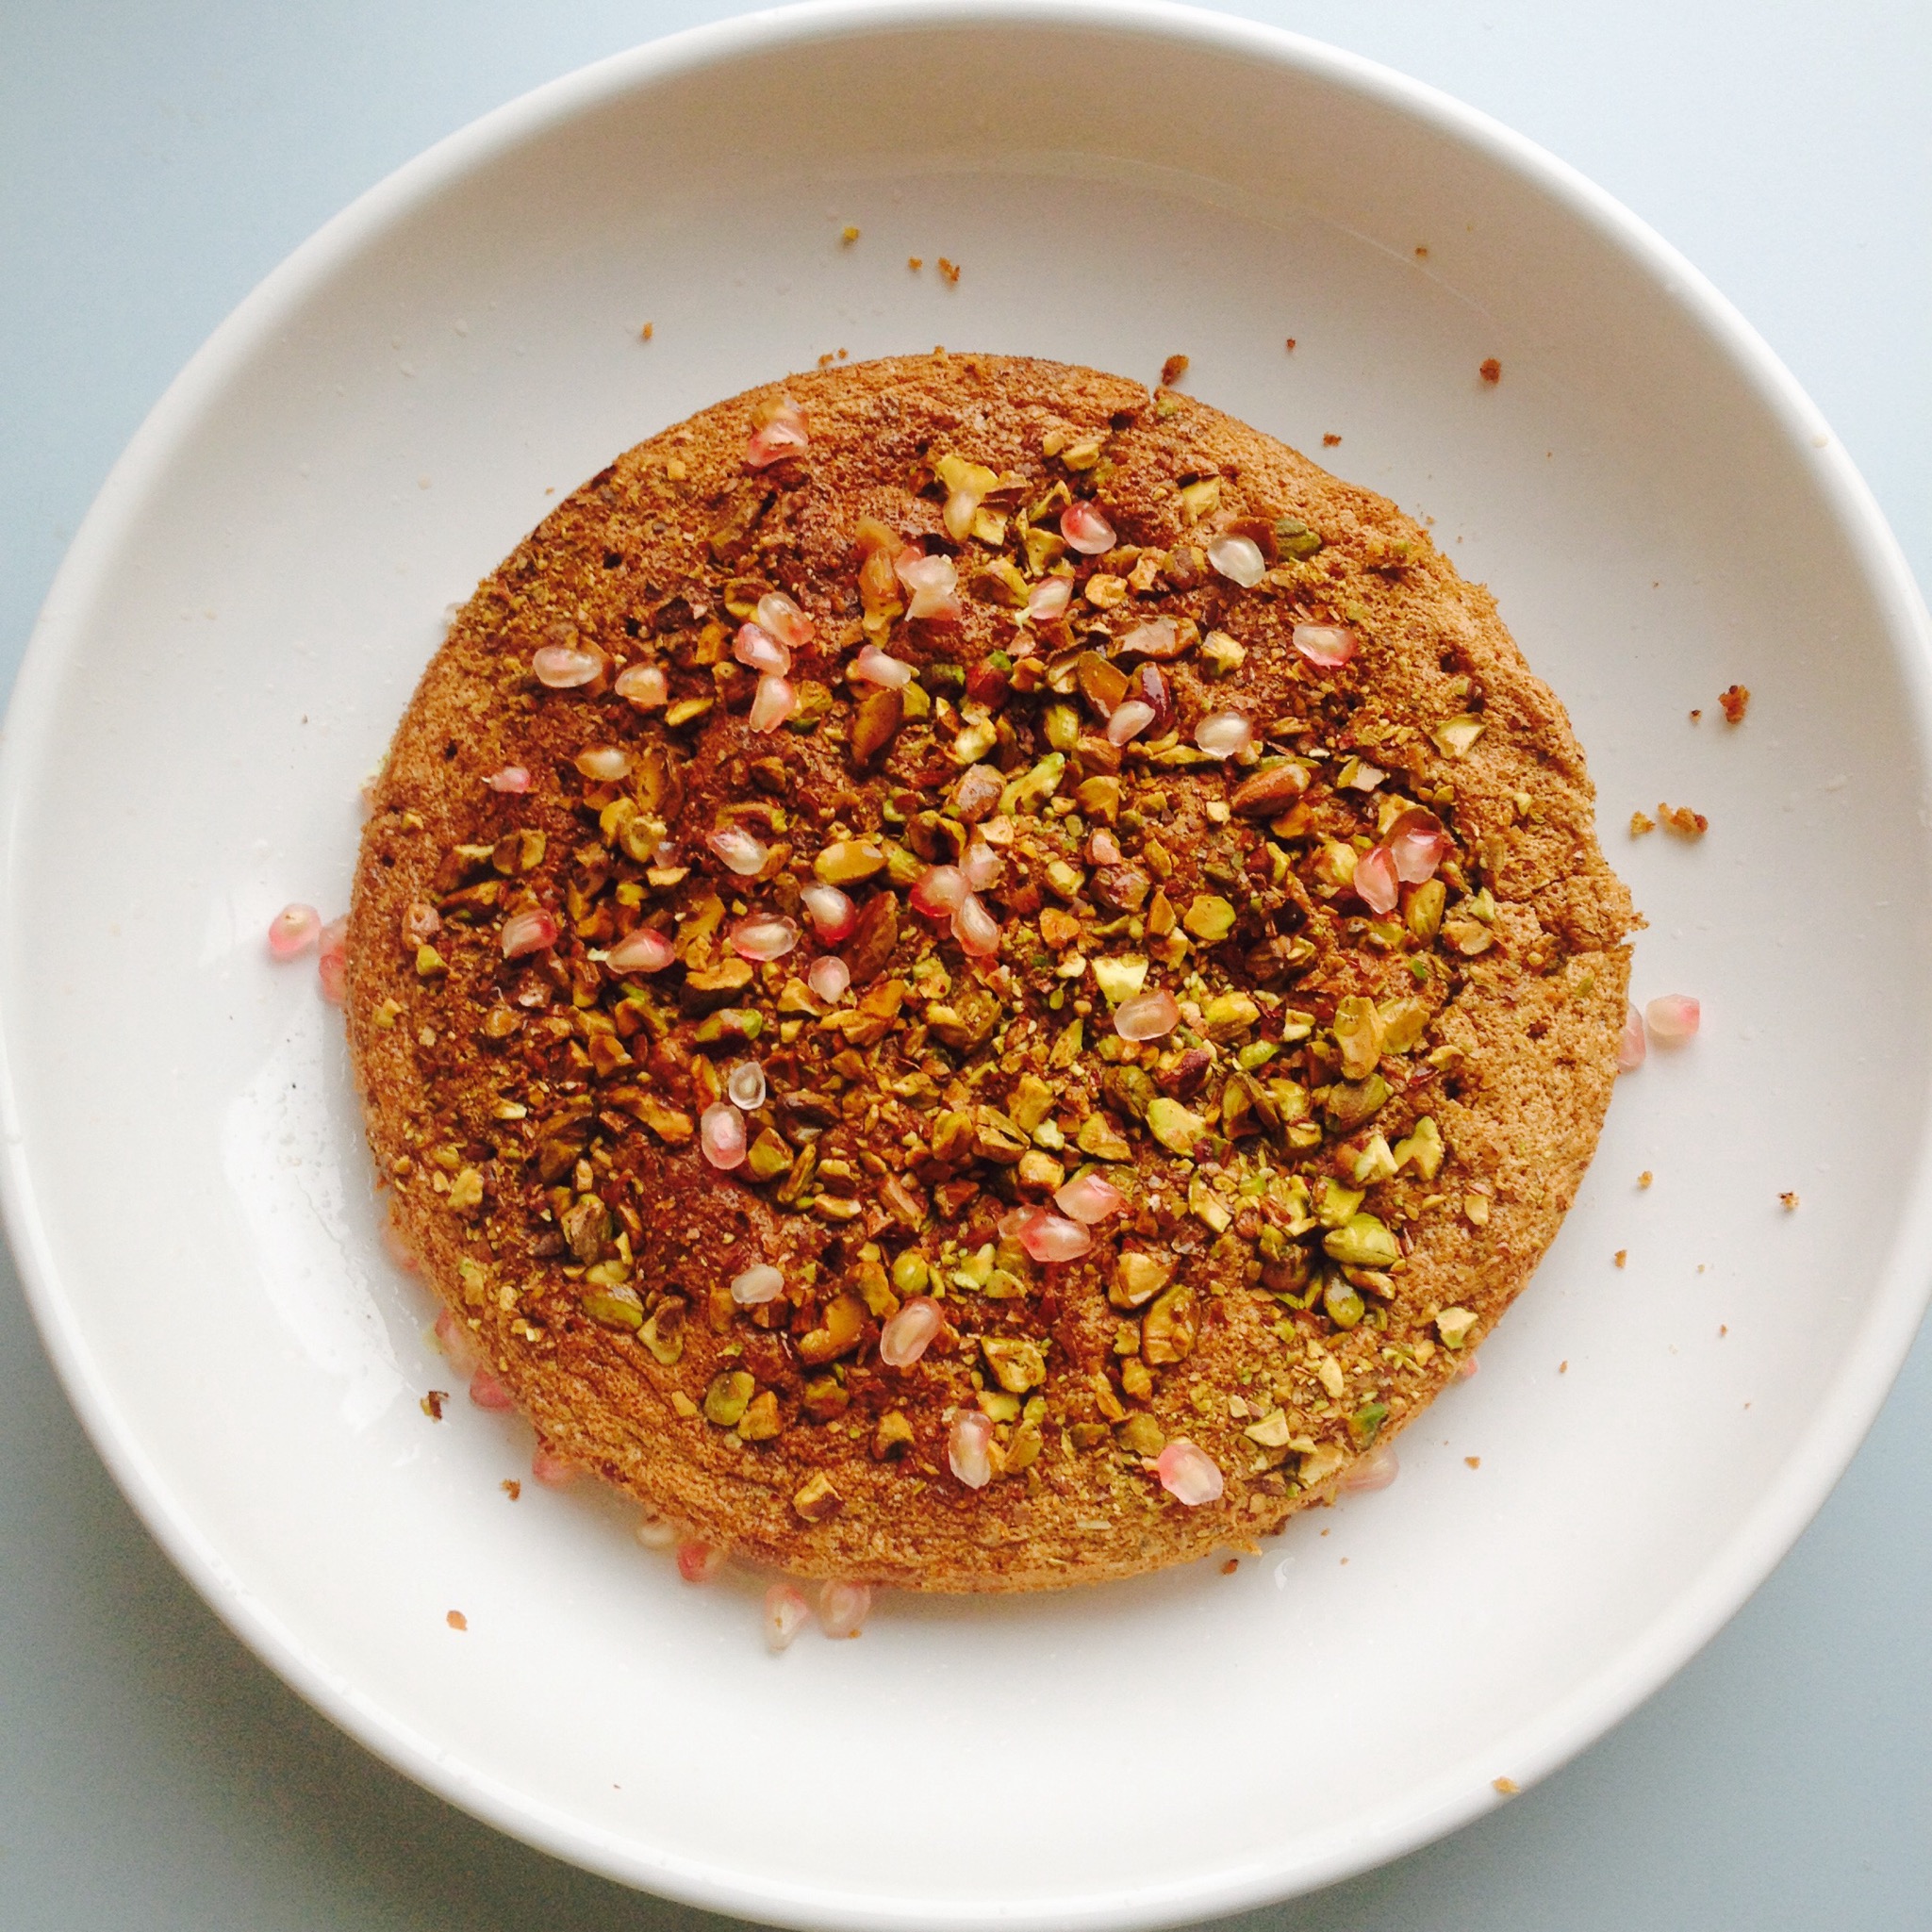 Pistachio and Rosewater Cake